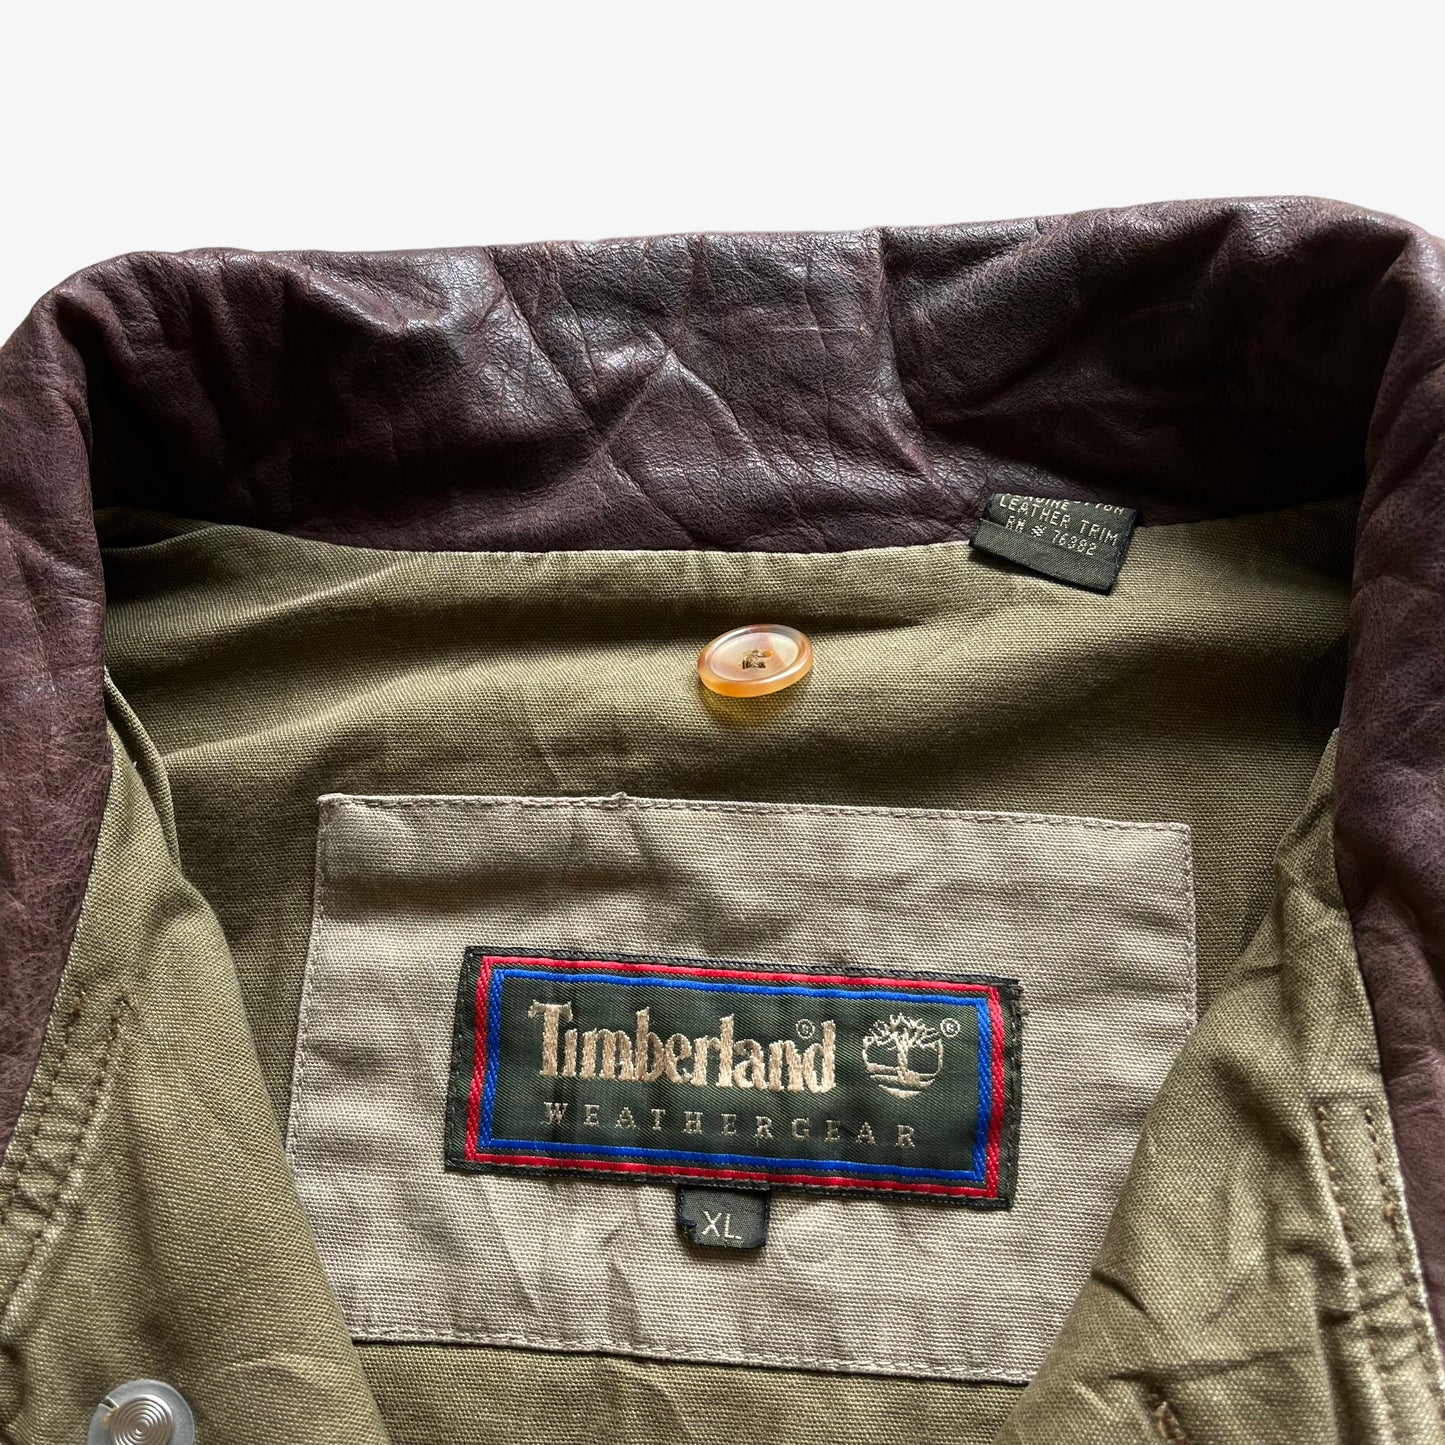 Vintage 90s Mens Timberland Khaki Workwear Jacket With Leather Collar Label - Casspios Dream